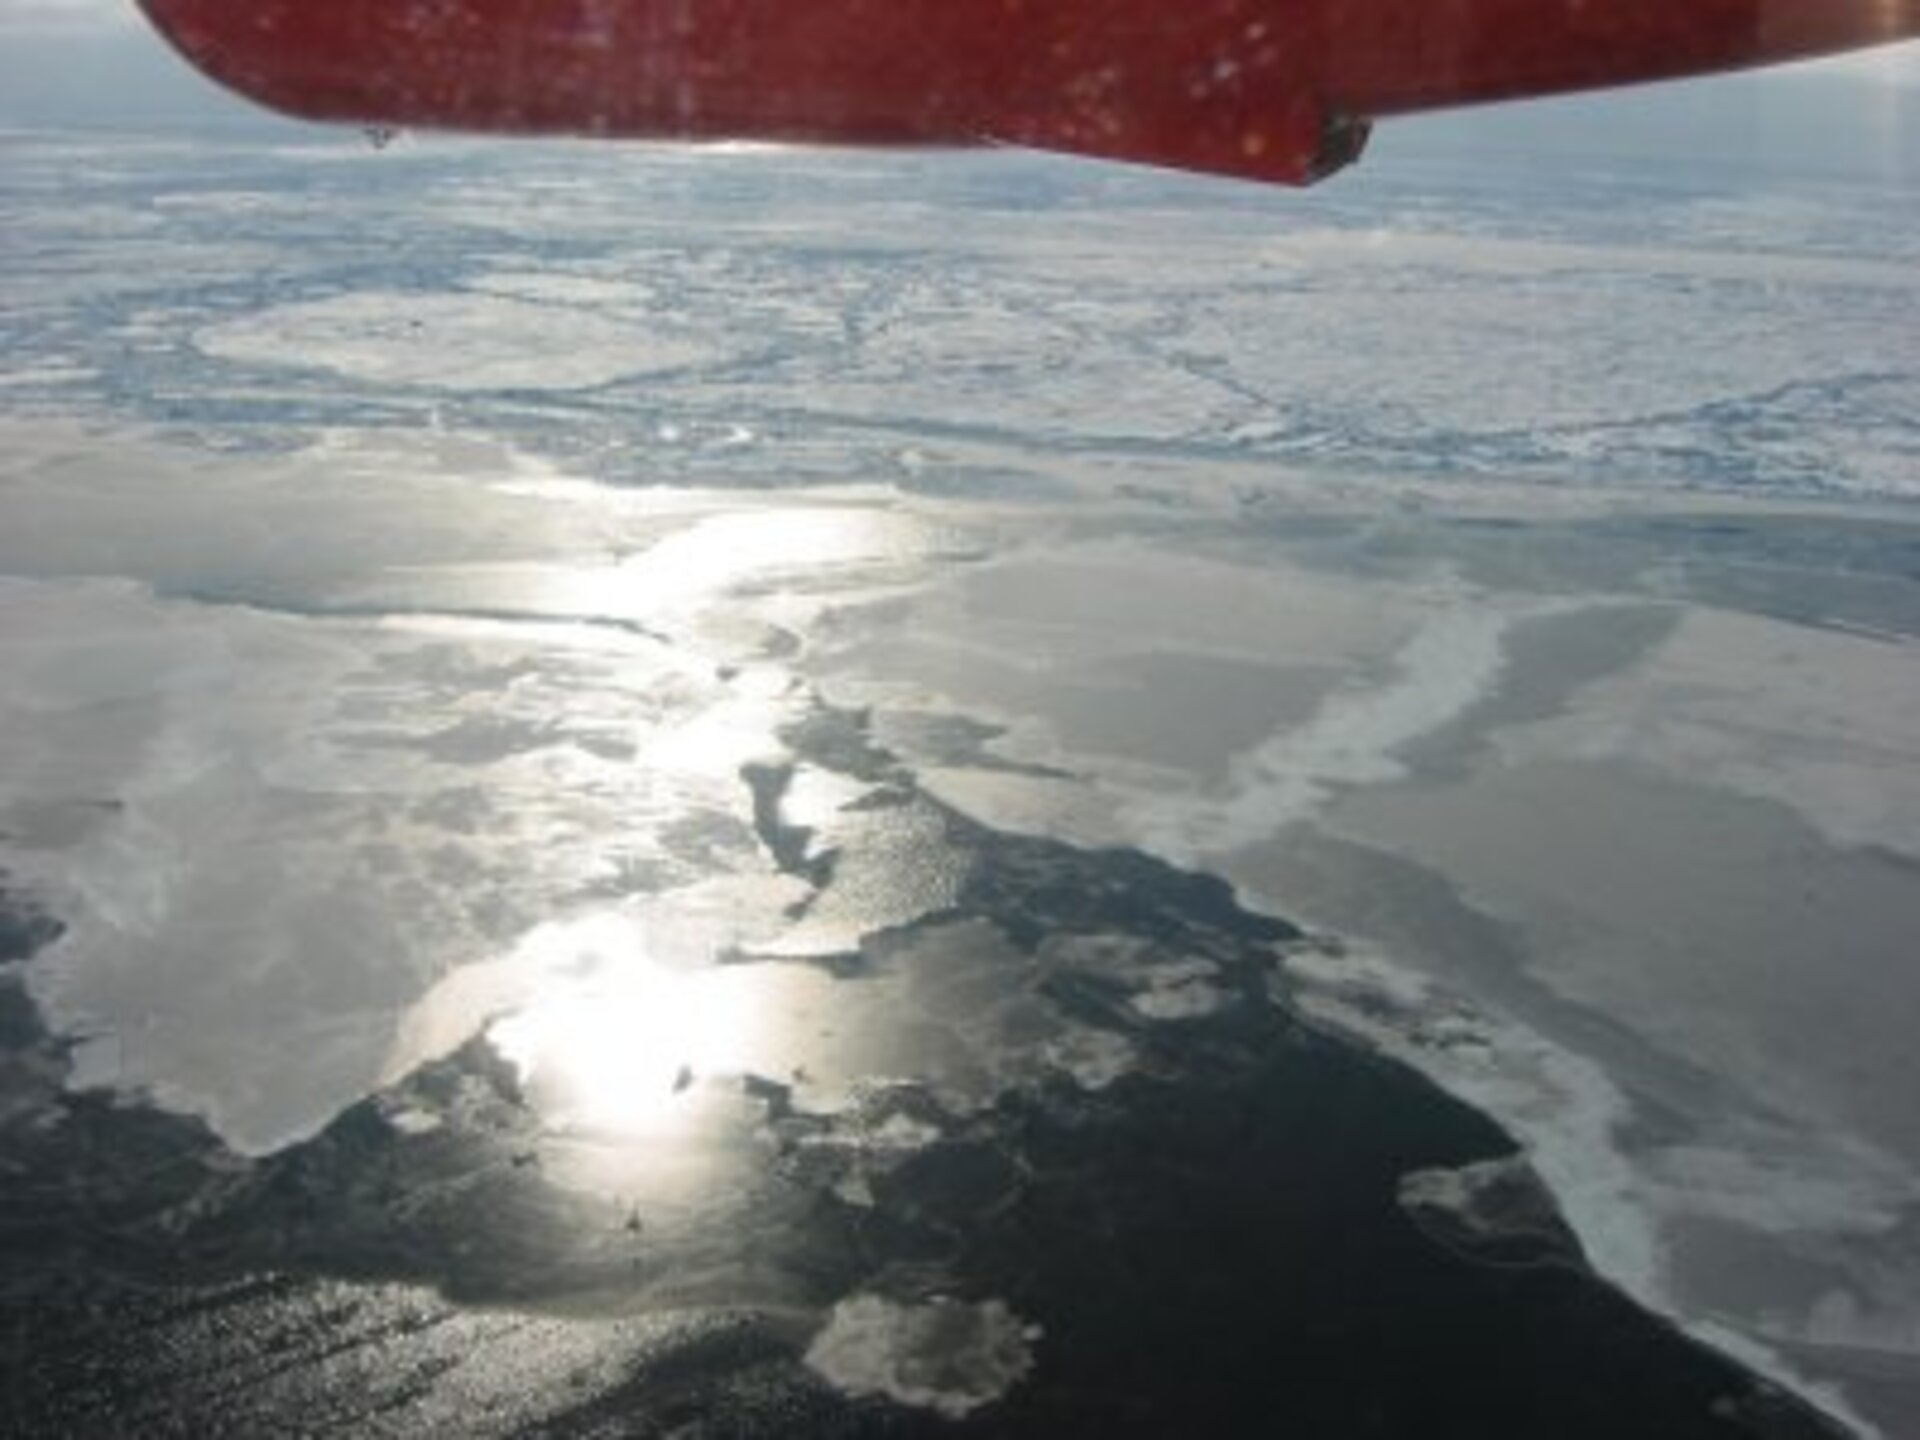 Arctic sea-ice with varying thickness and surface conditions